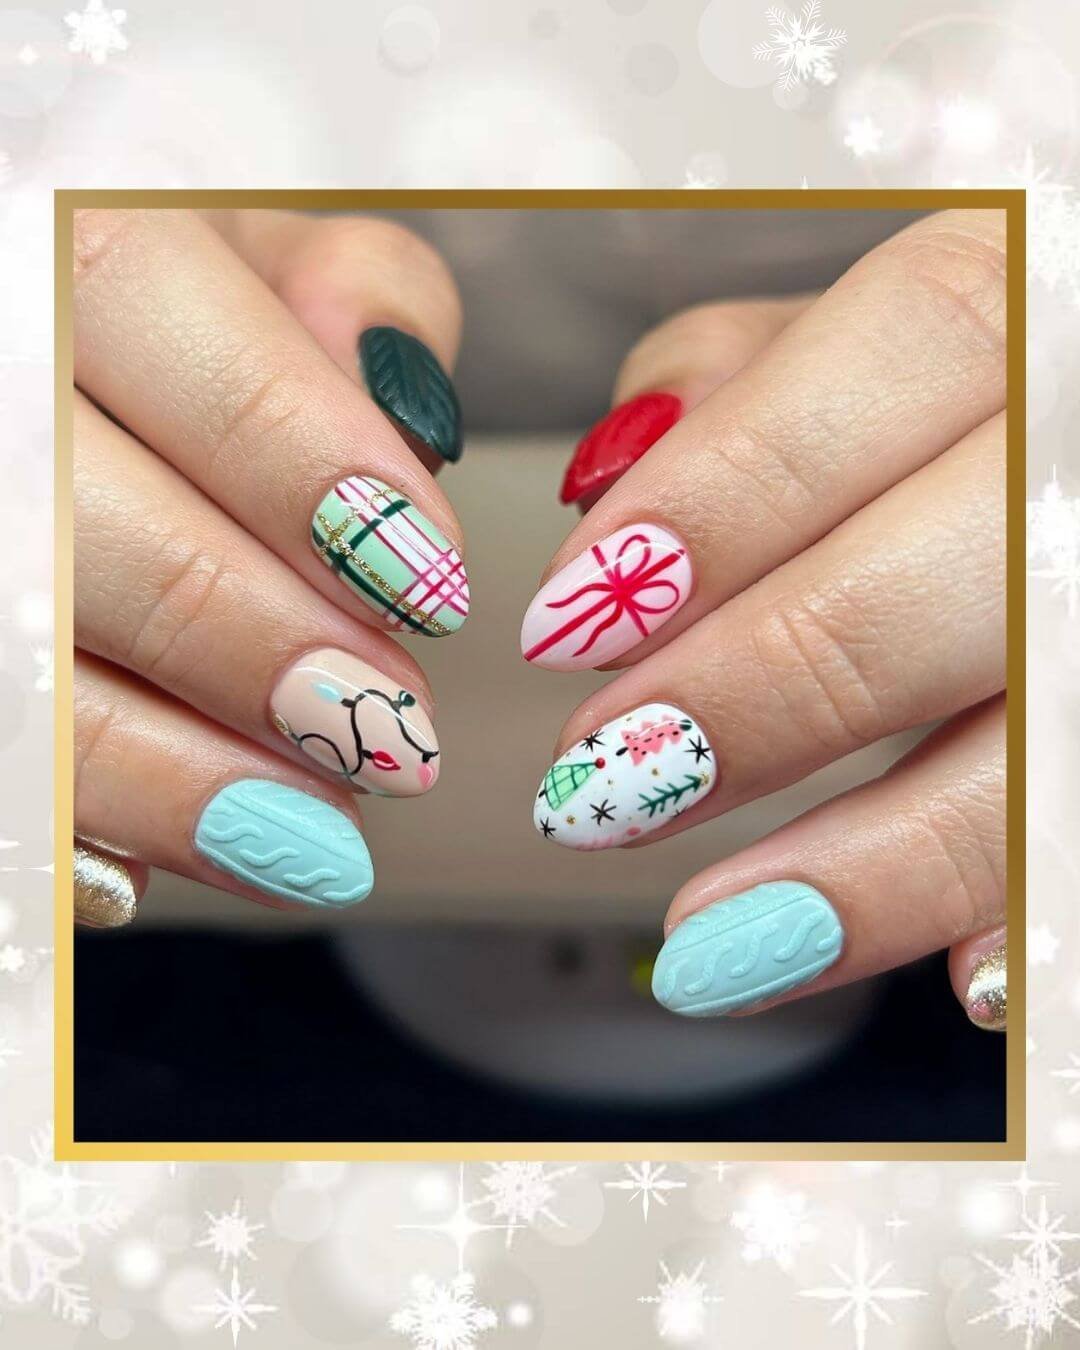 Christmas Nails Design Ideas Under the Tree